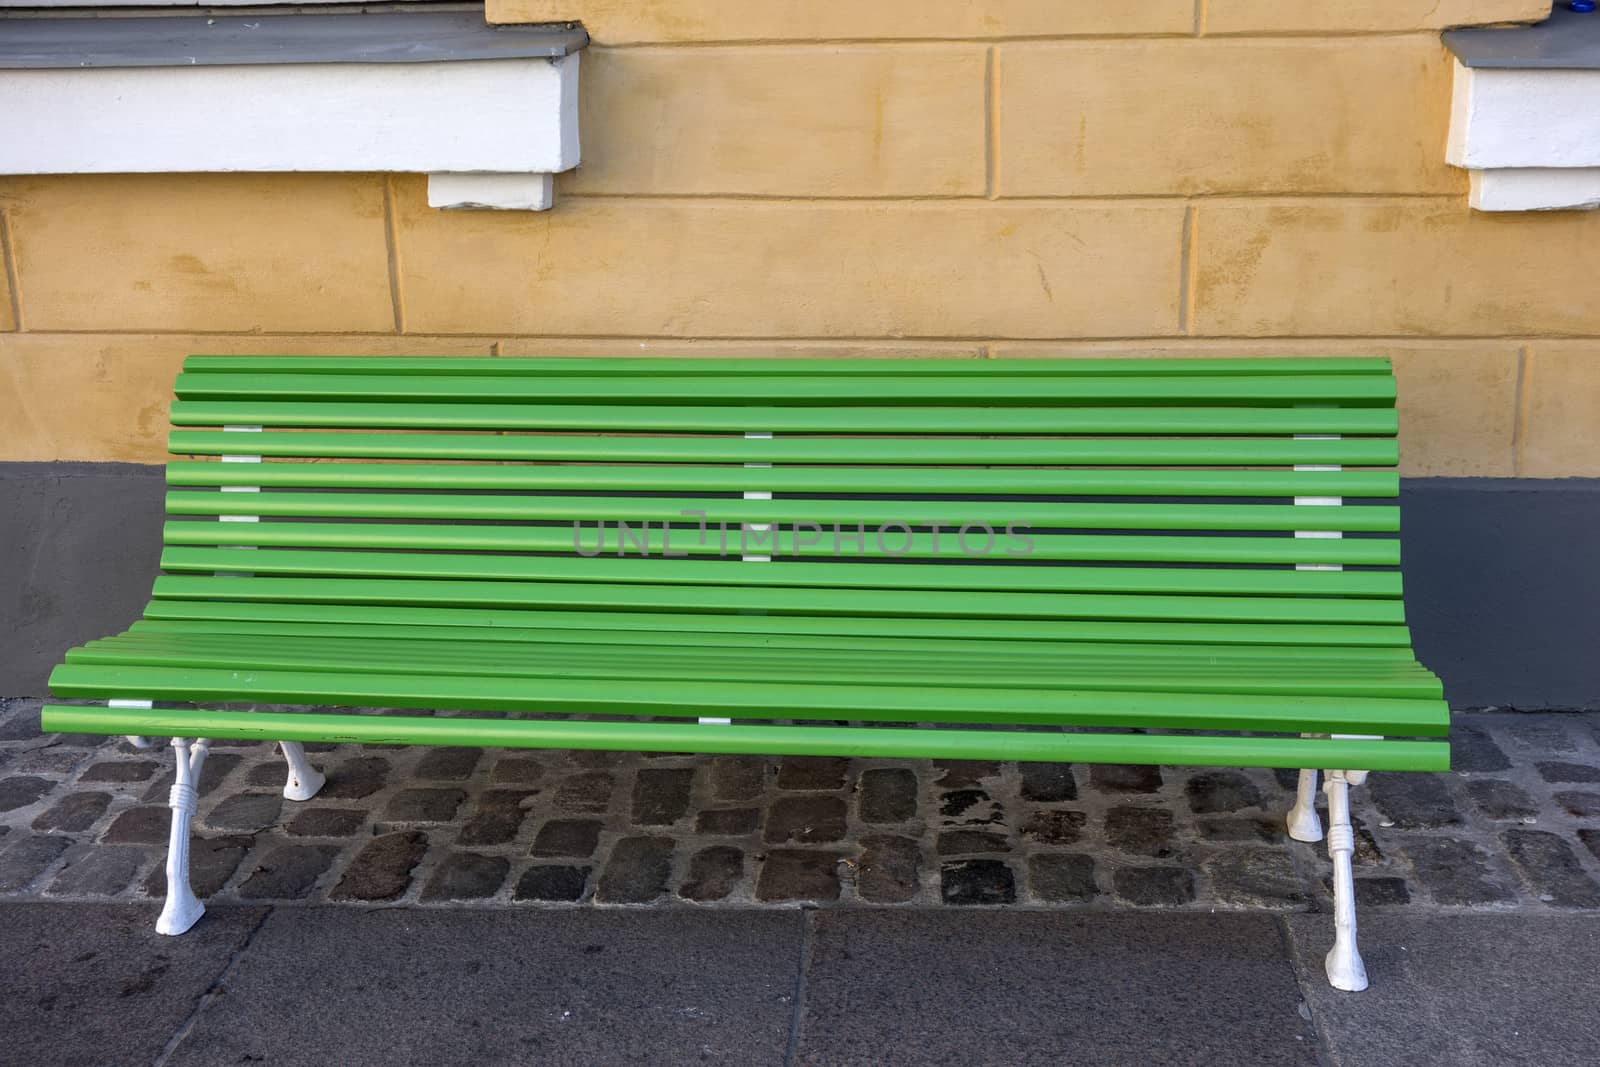 Green bench in the street